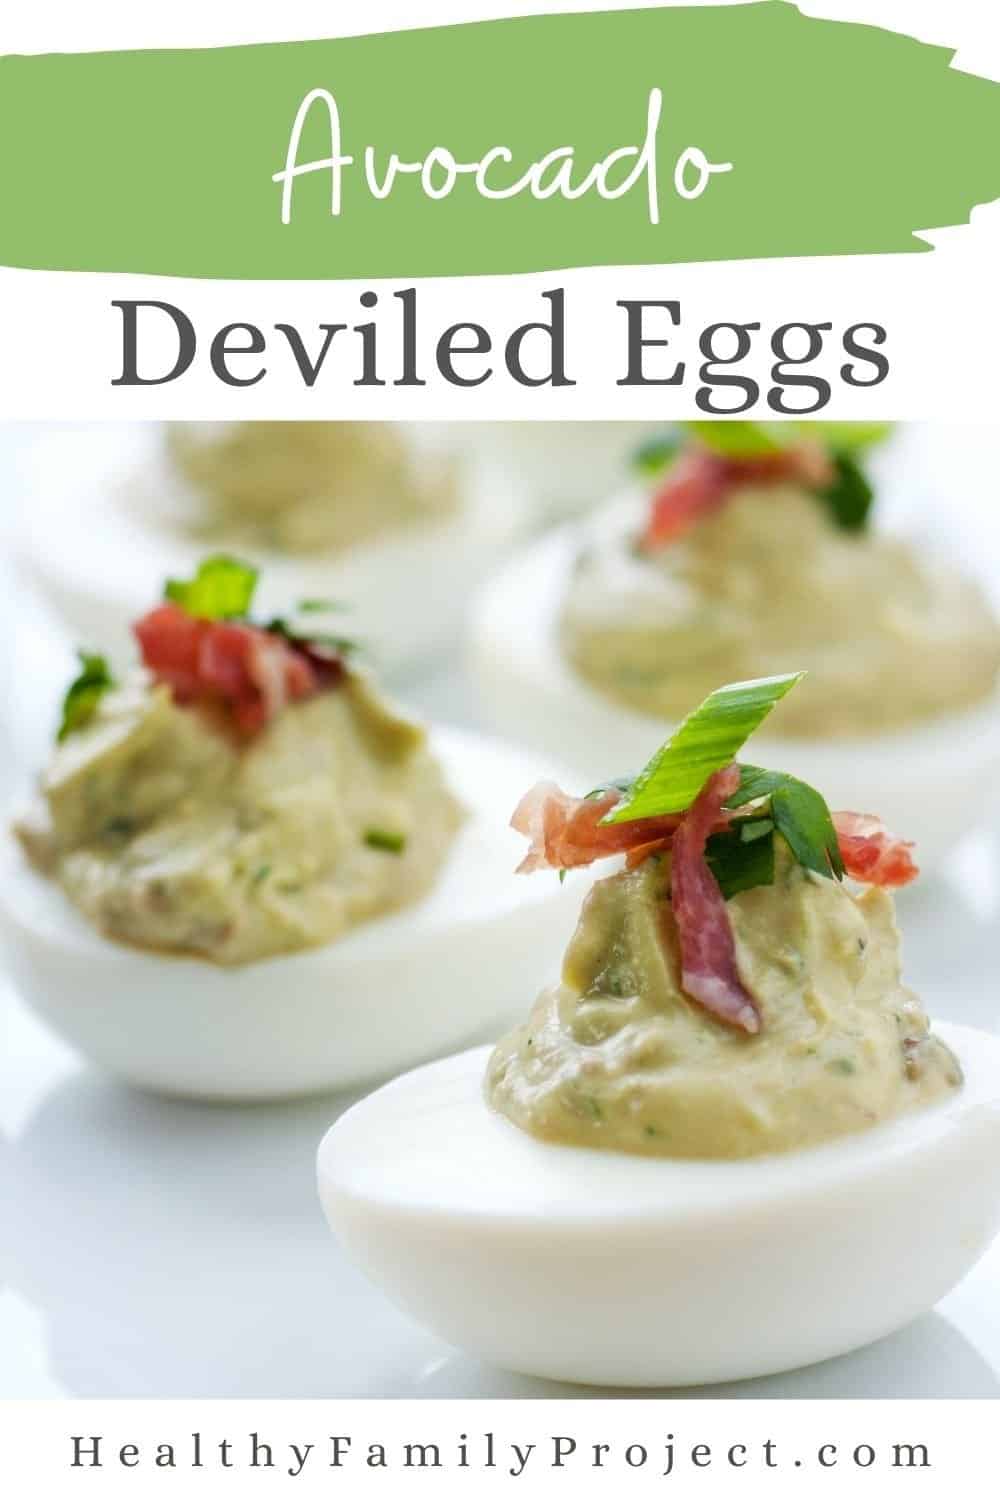 How to Make Deviled Eggs with Avocado 